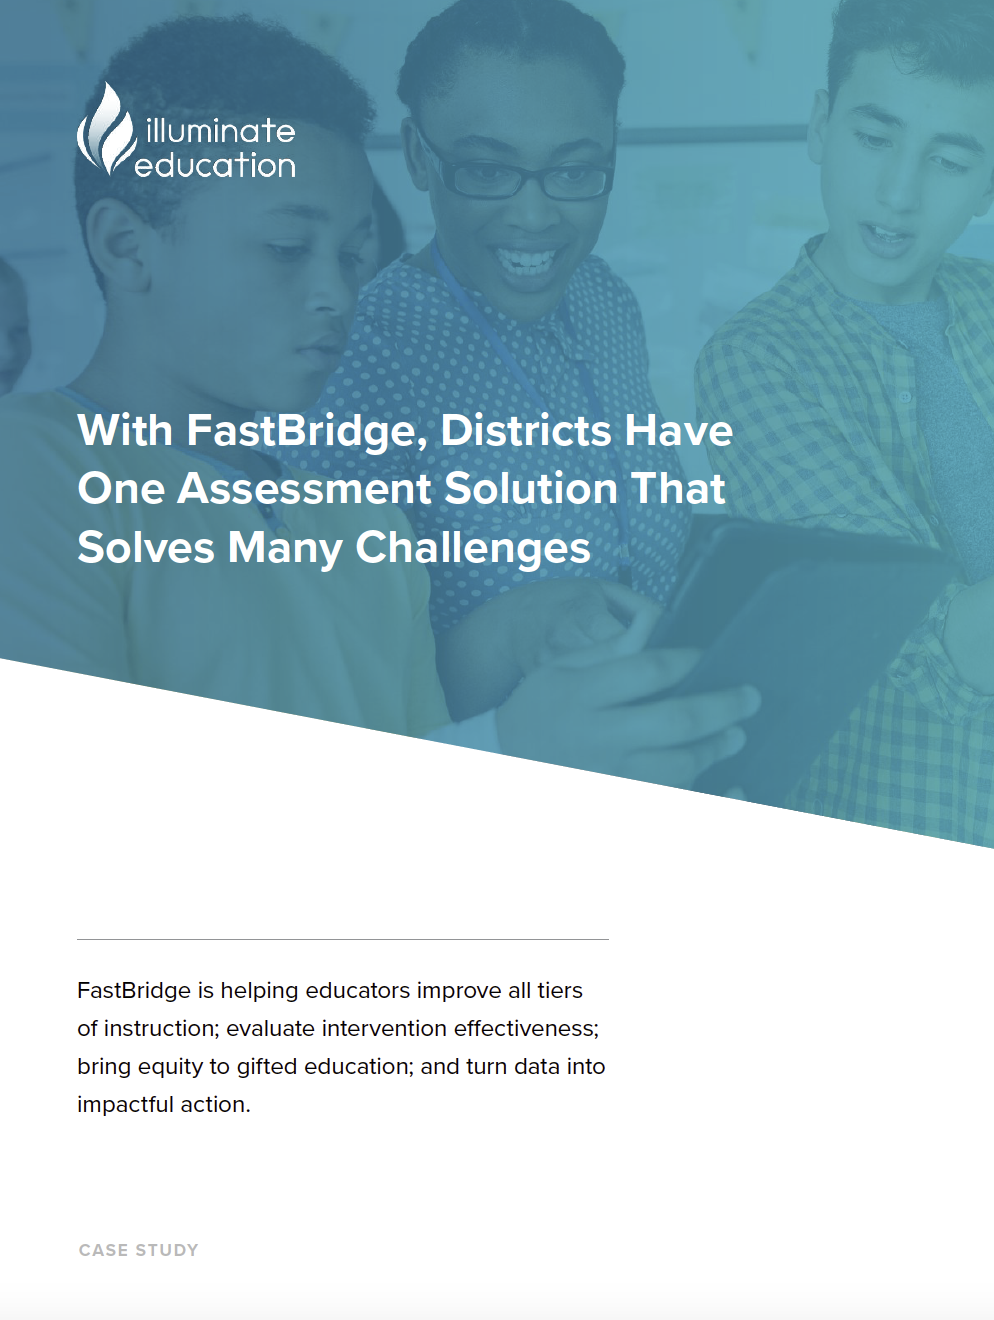 With FastBridge, Districts Have One Assessment Solution That Solves Many Challenges